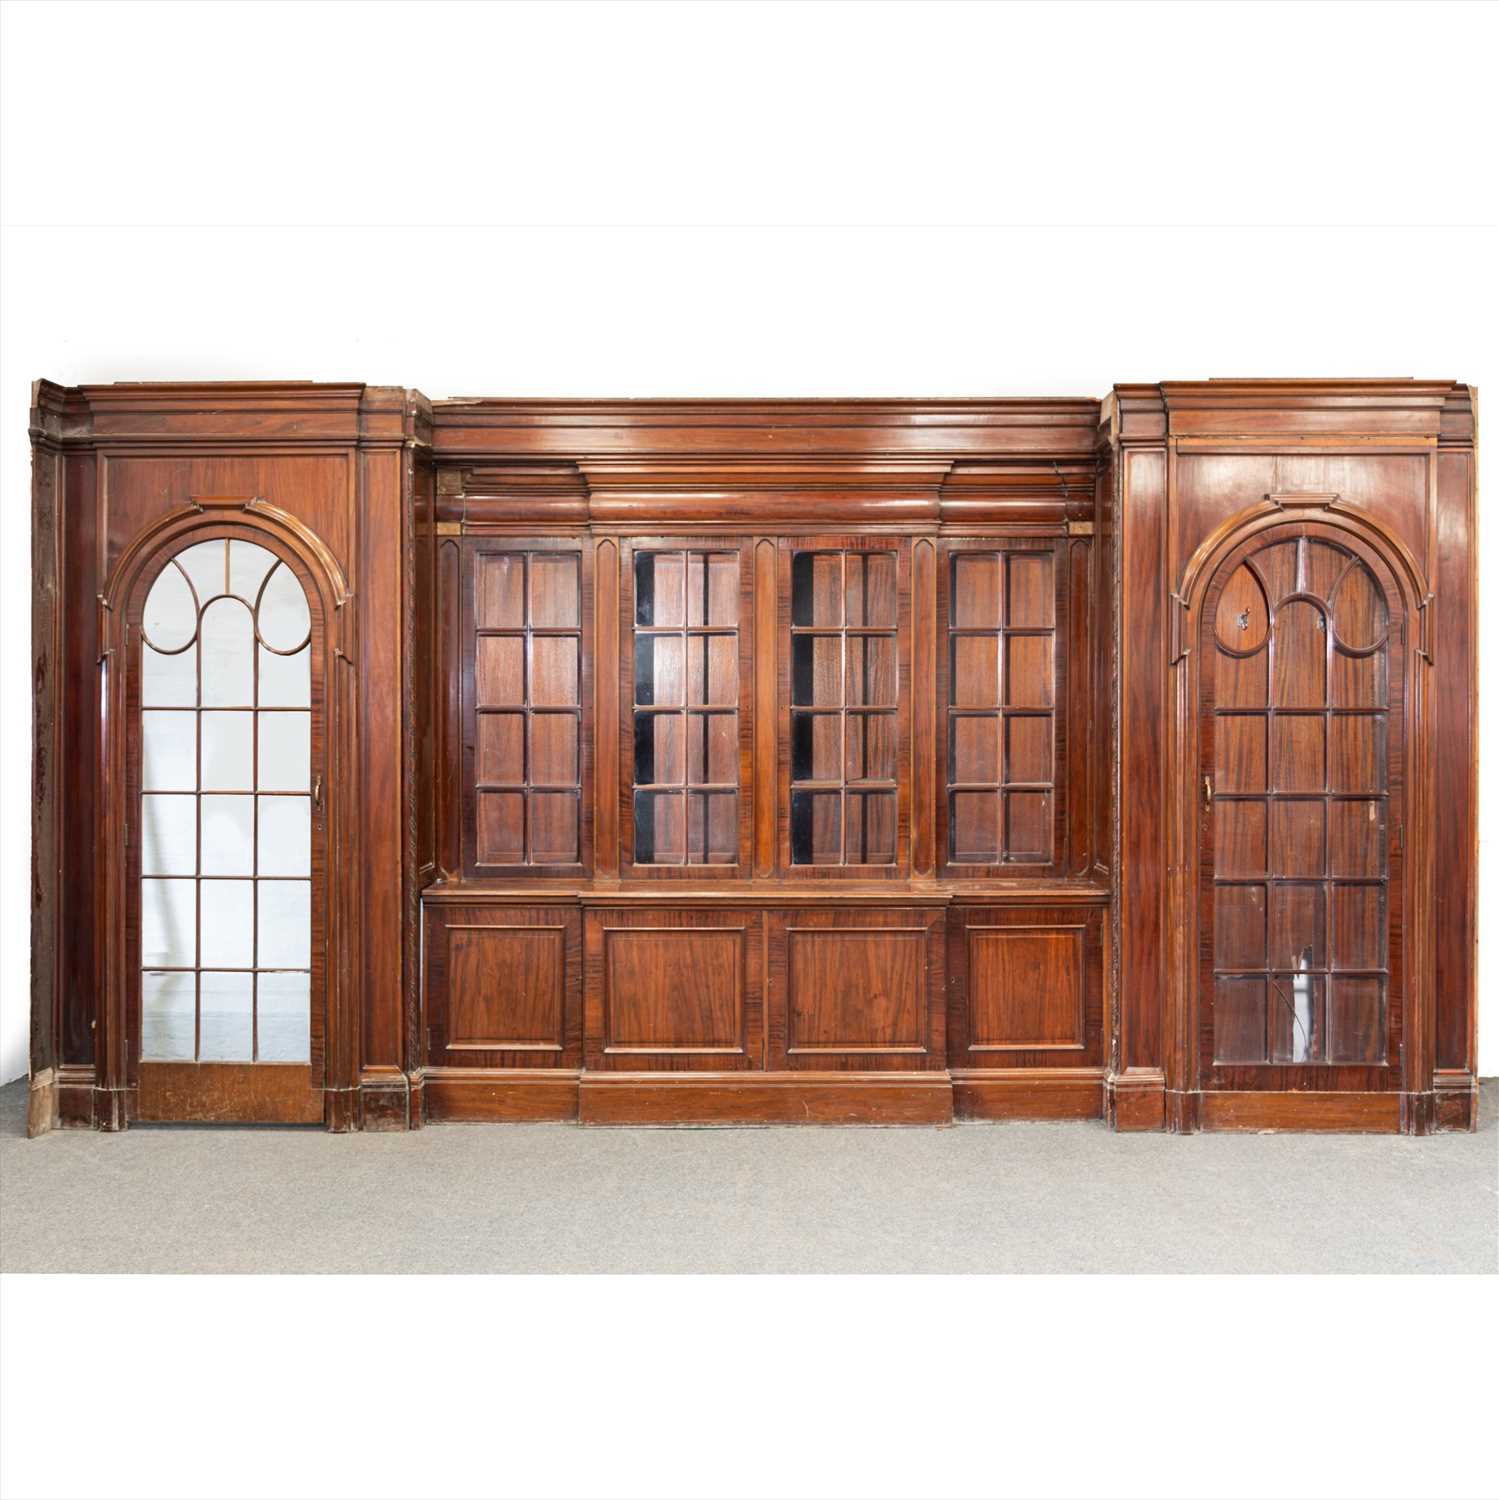 Lot 515 - A large mahogany bookcase fascia, designed by Sir Edwin Lutyens for the Billiard Room of Papillon Hall